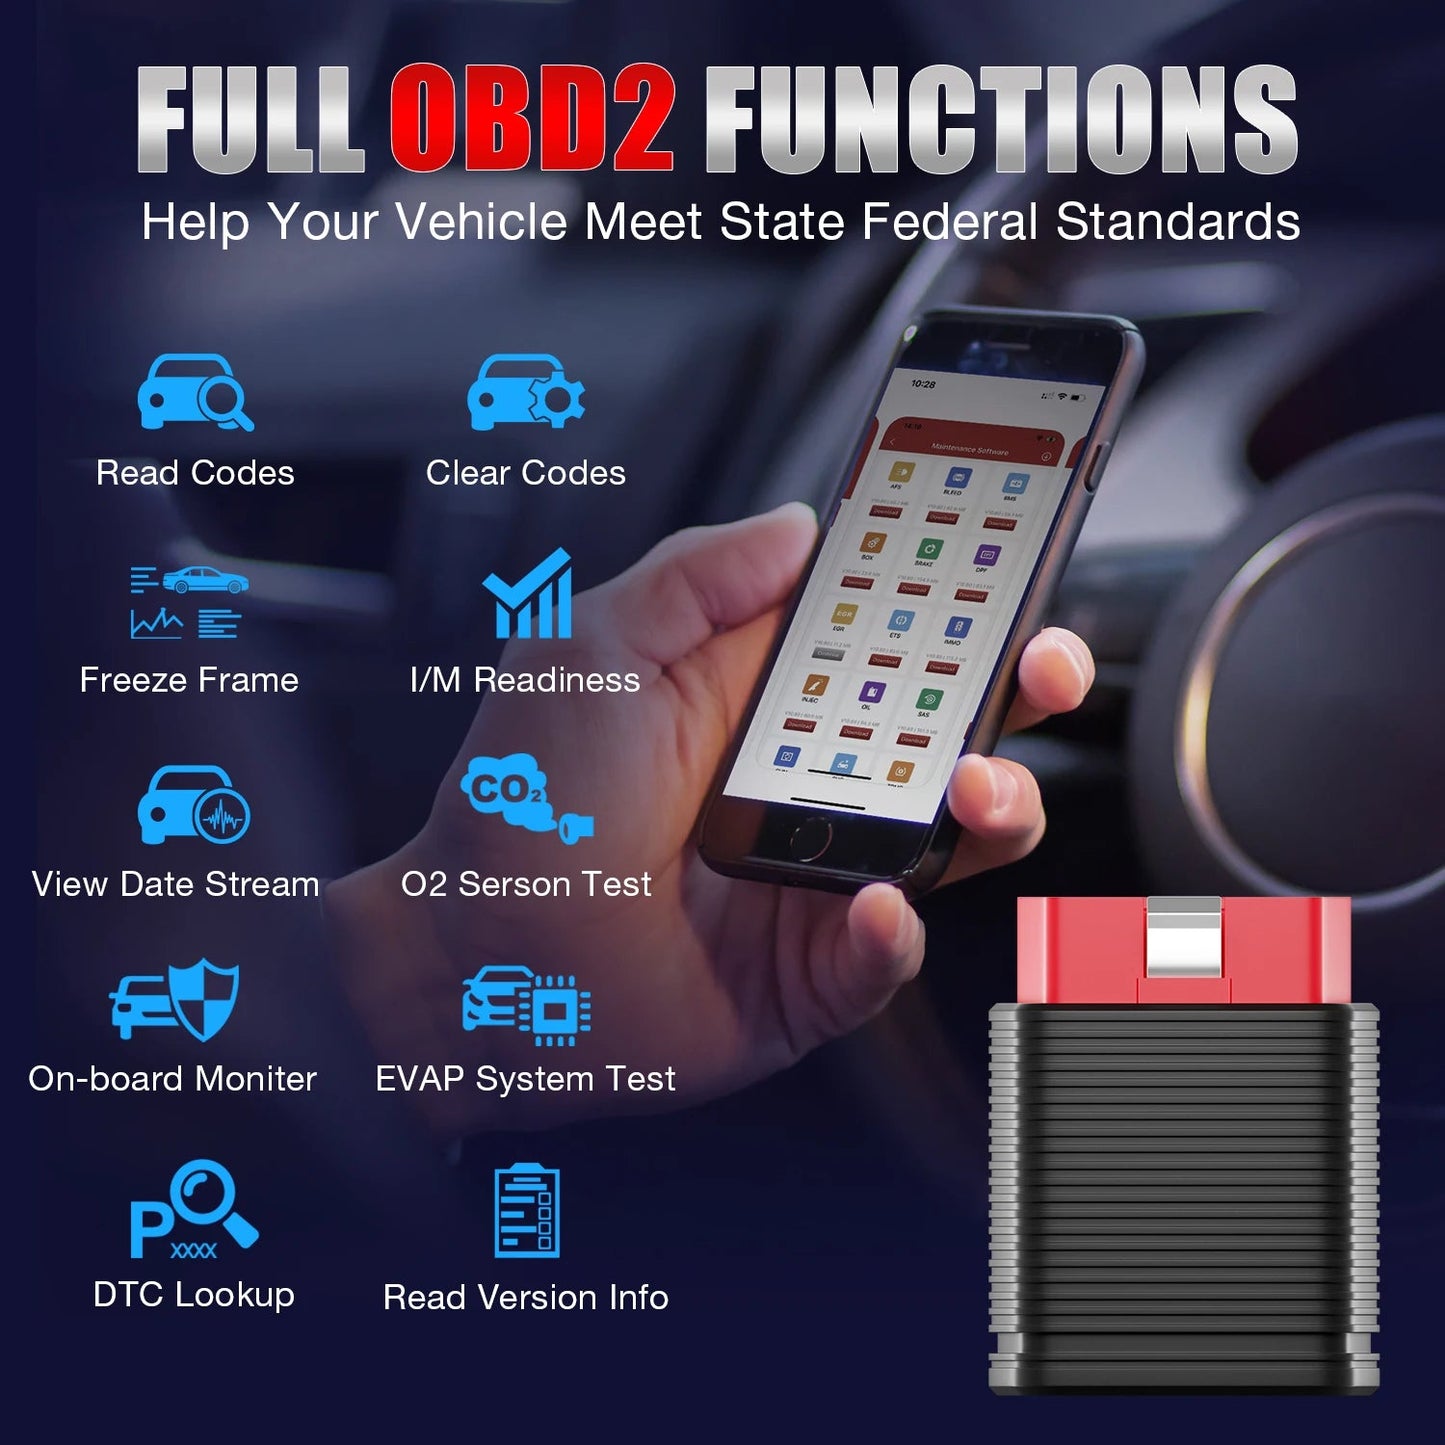 New Ediag Mini Auto Diagnostic Tool All Cars Full System Diagnose 15 Resets Lifetime Free OBD2 Scanner Read Clear Code Error - Dynamex